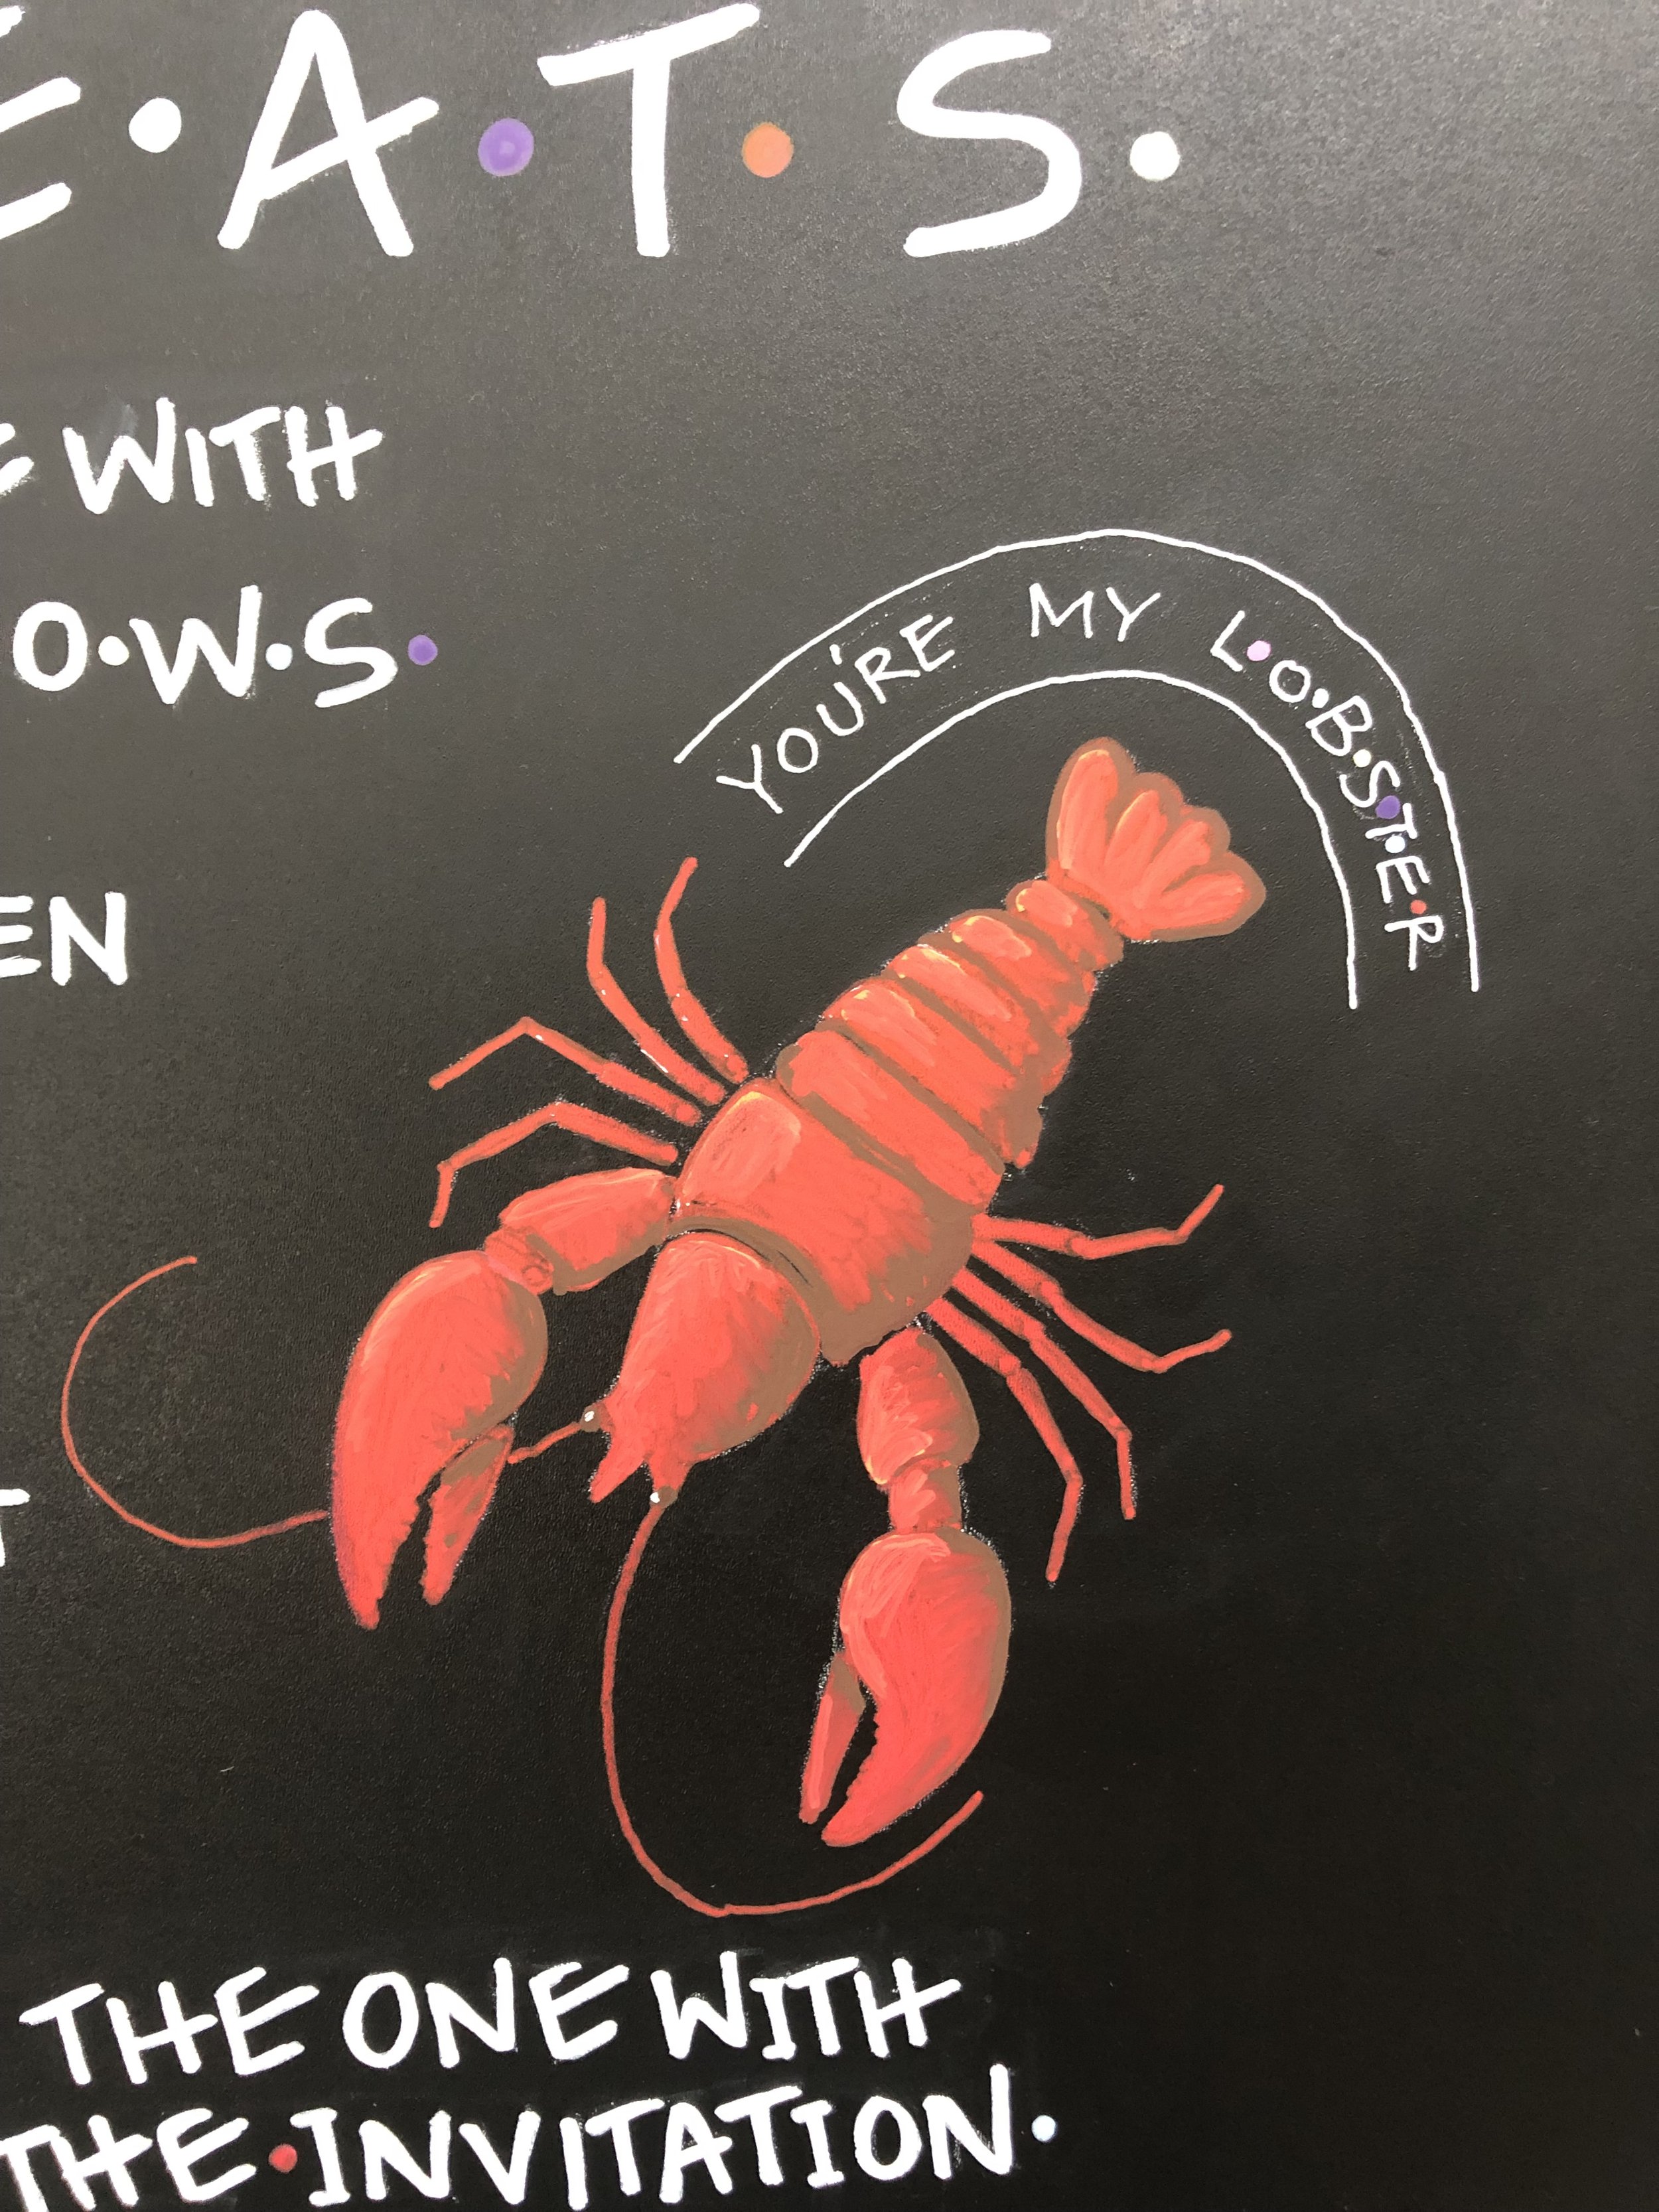 You're my lobster